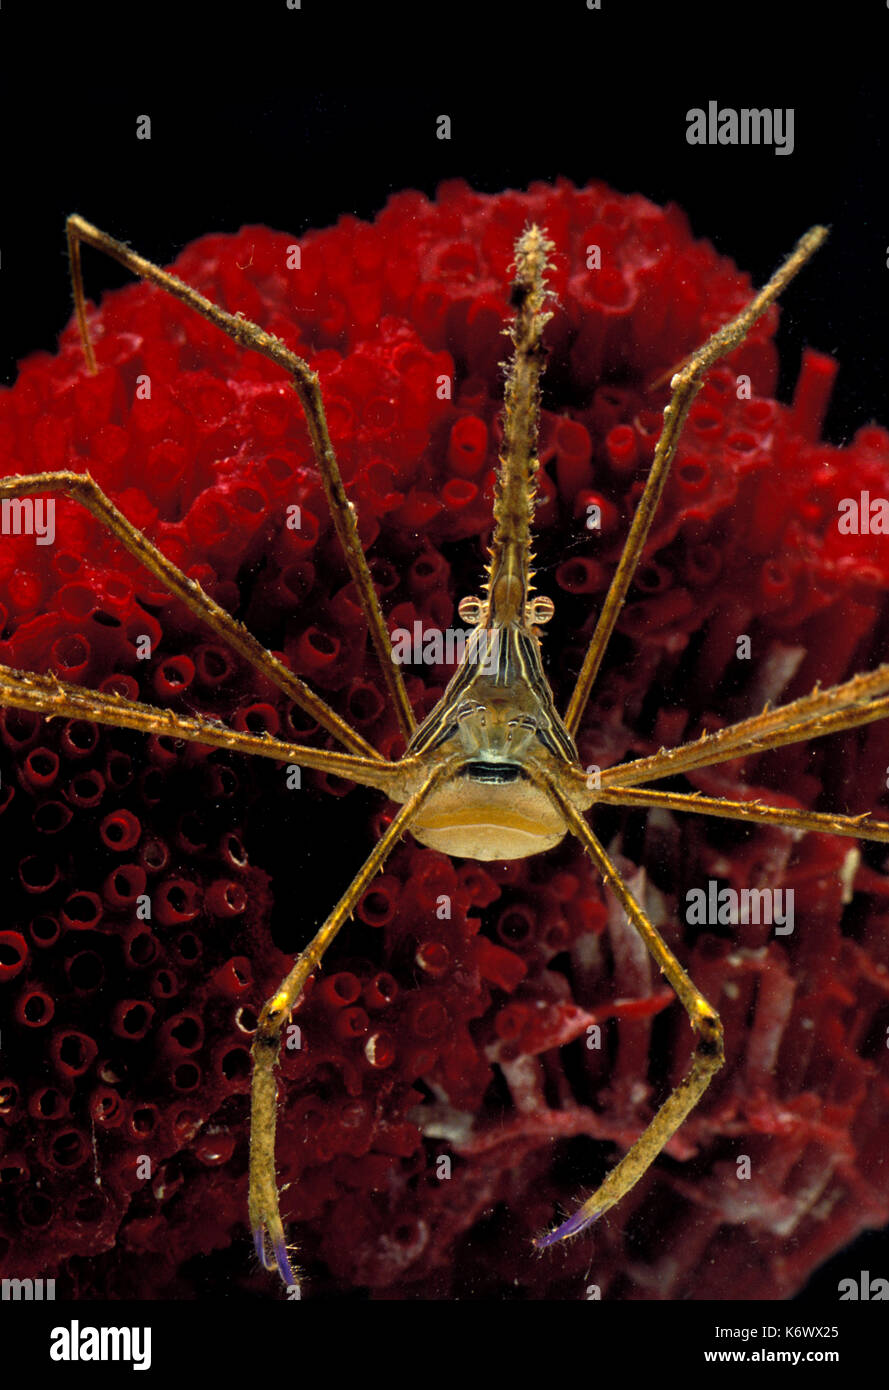 Arrow Crab, Stenorhynchus seticornis, Arrowhead crab on red coral, front view, captive Stock Photo